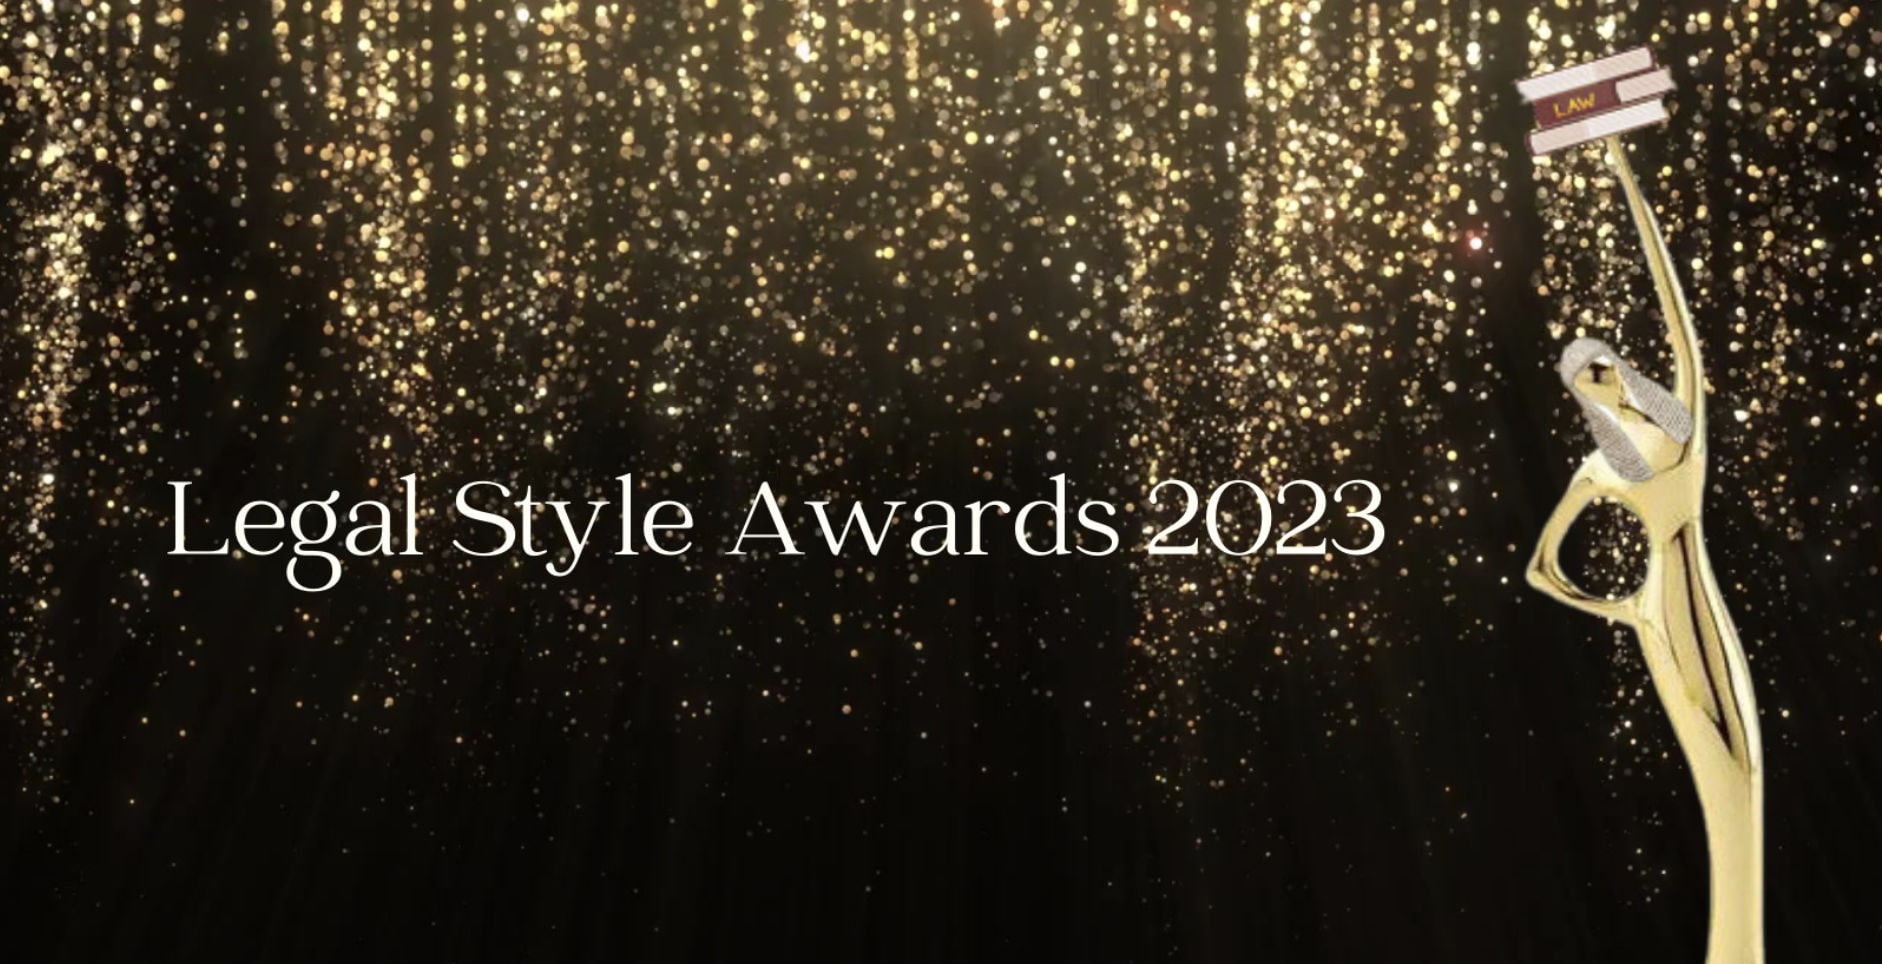 The Legal Style Awards 2023